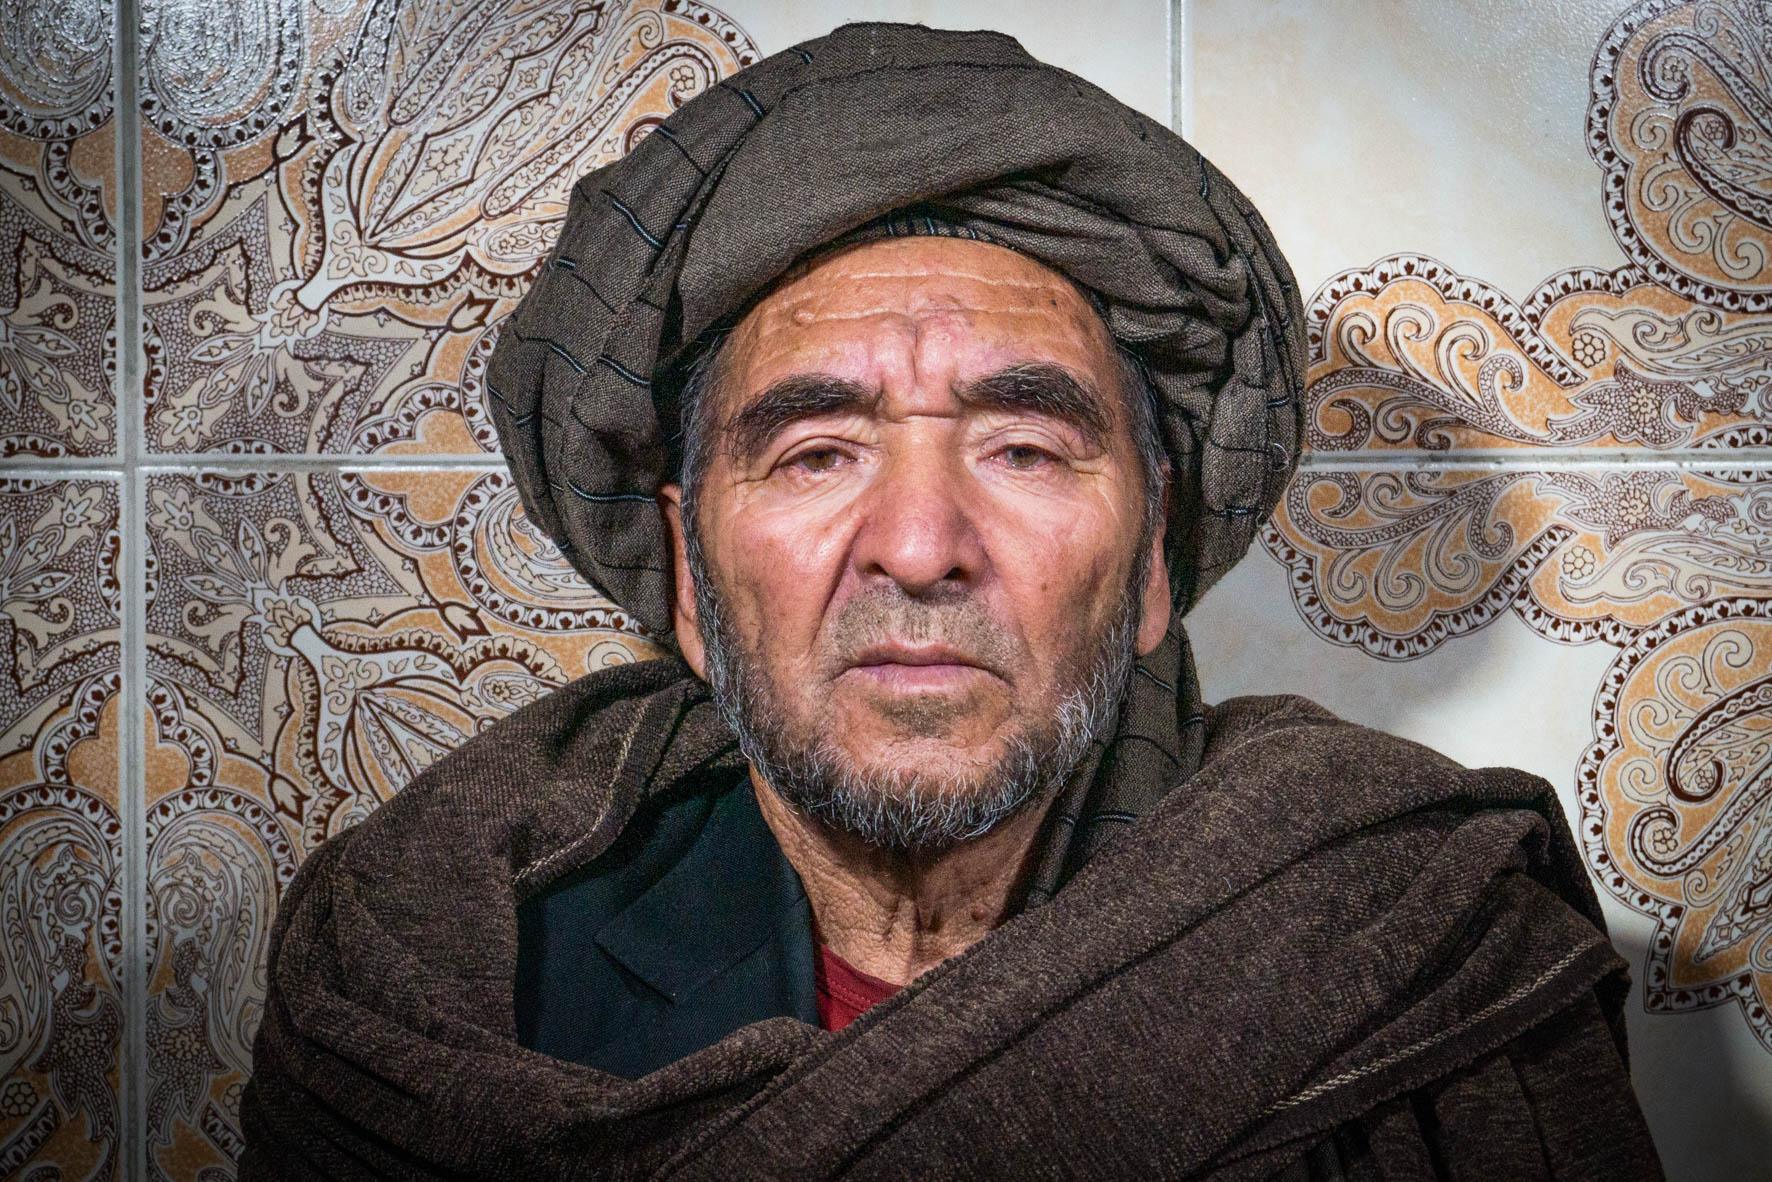 Zamon, an old man who was suffering from retinal vascular disease before coming to MOC